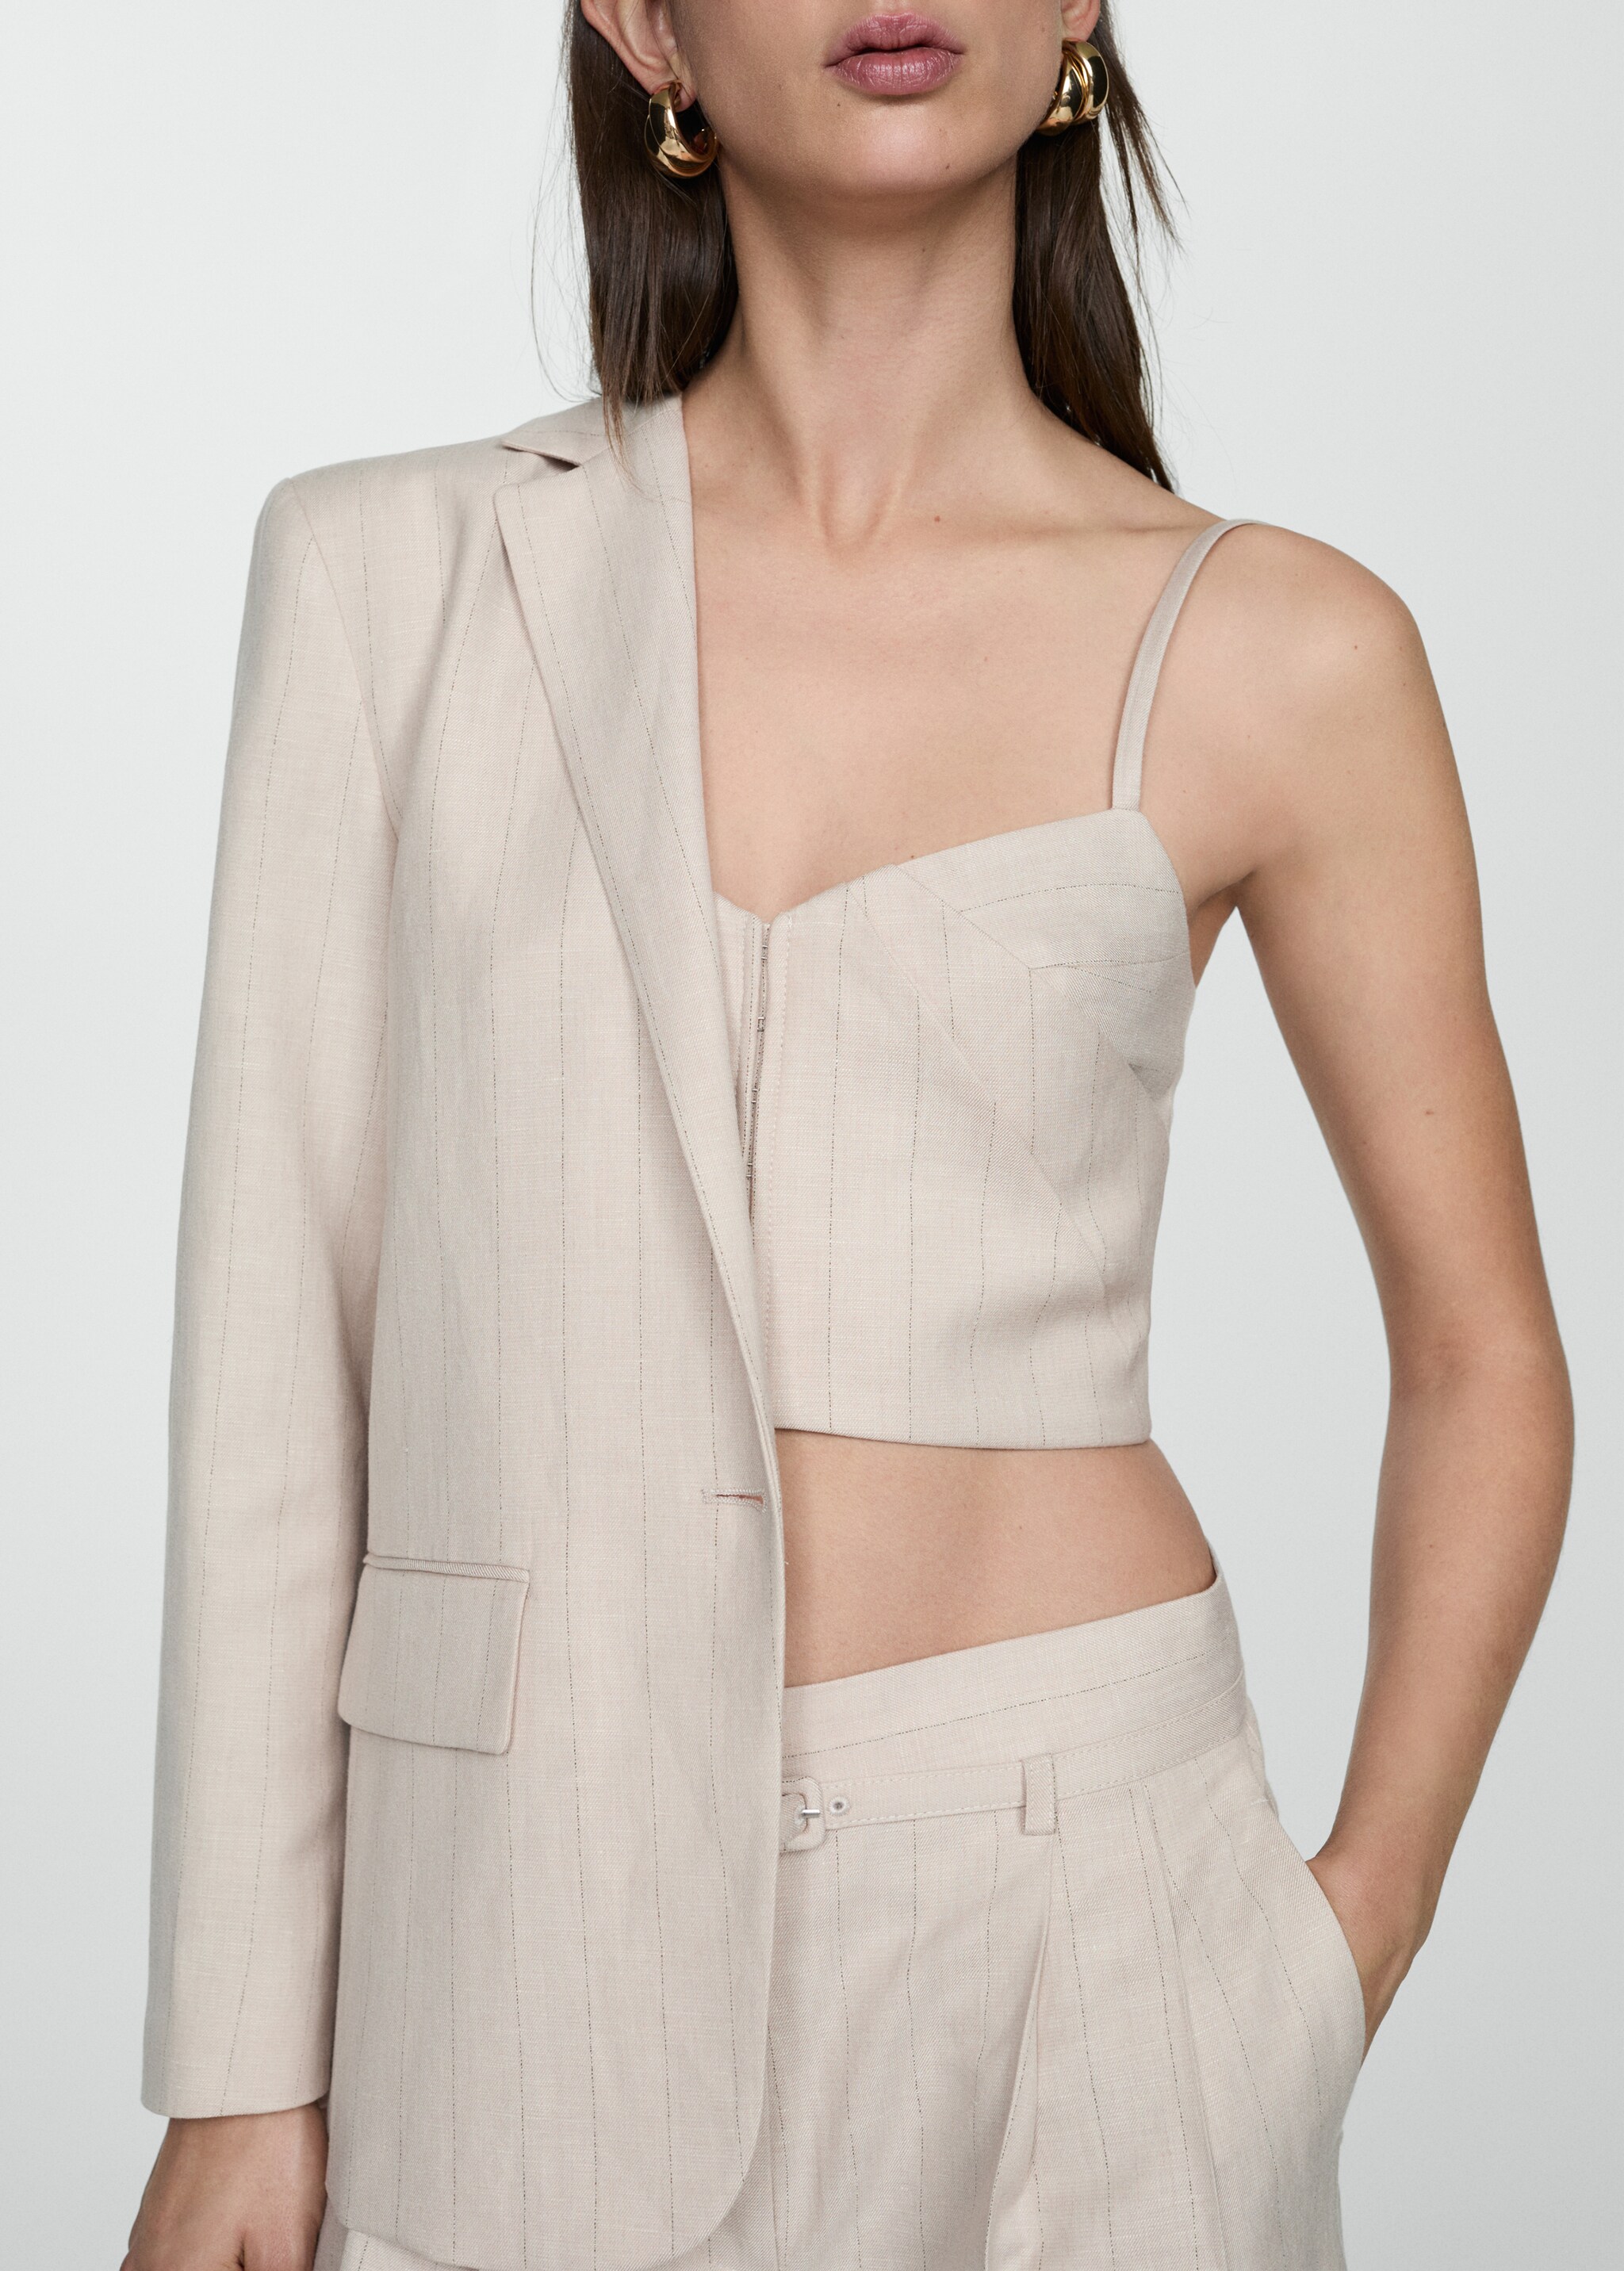 Strapless top with pleat detail - Details of the article 6